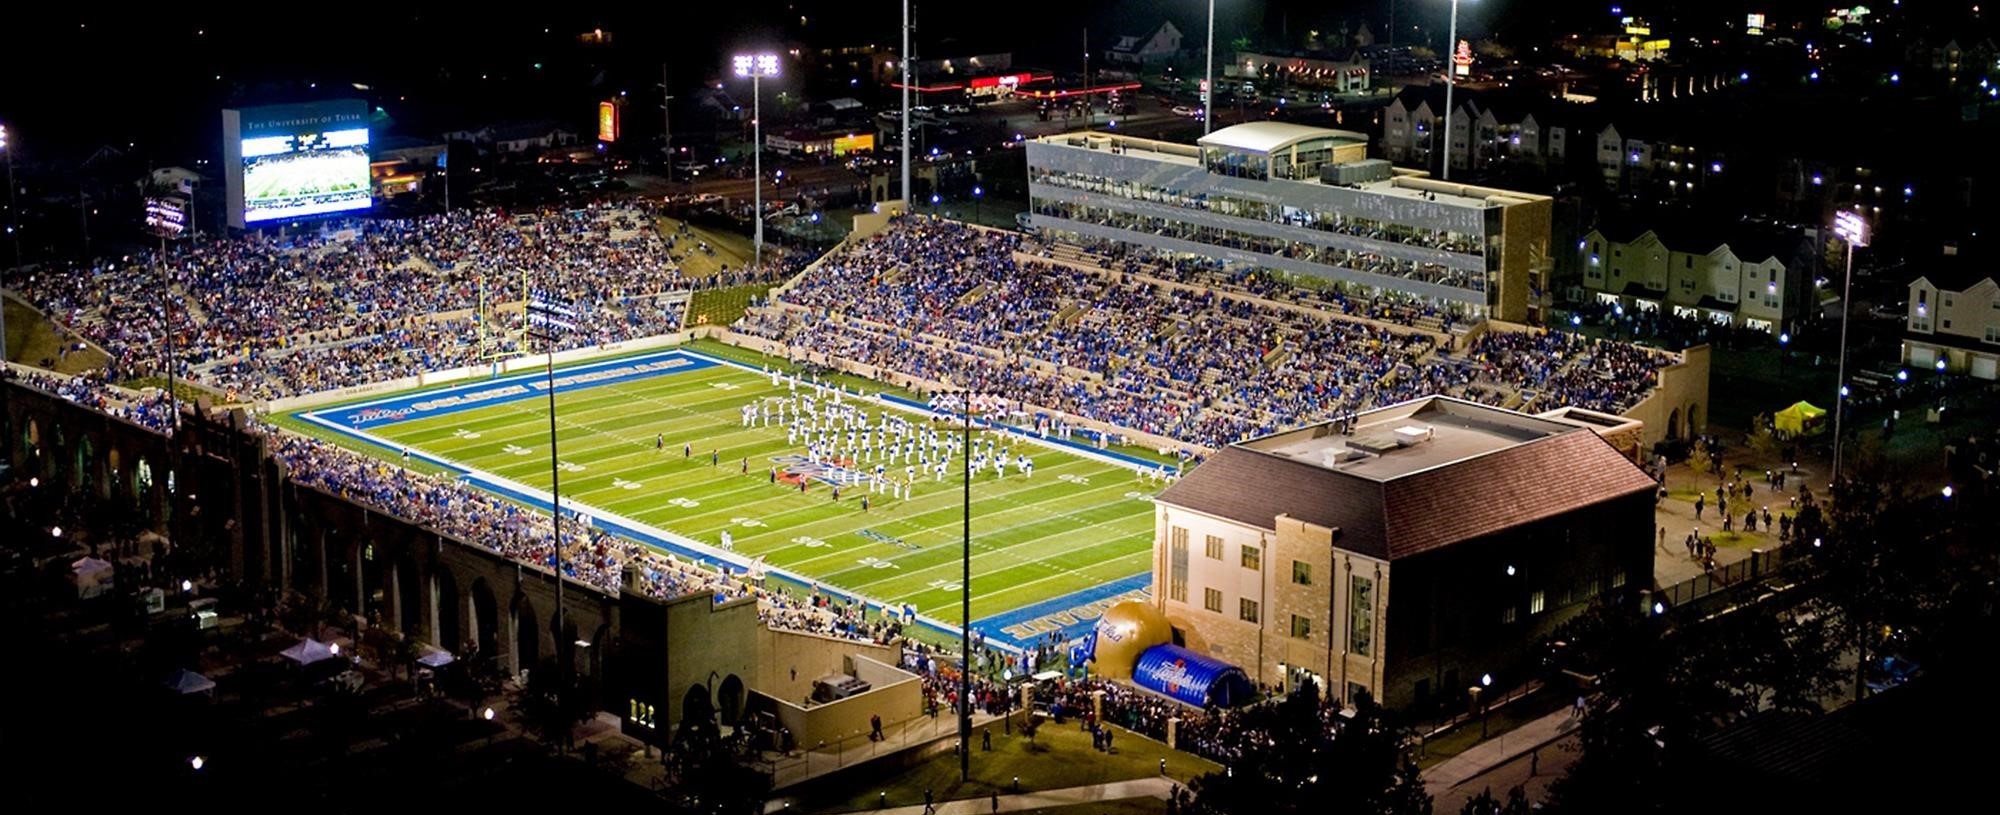 Skelly field at h.a. chapman stadium